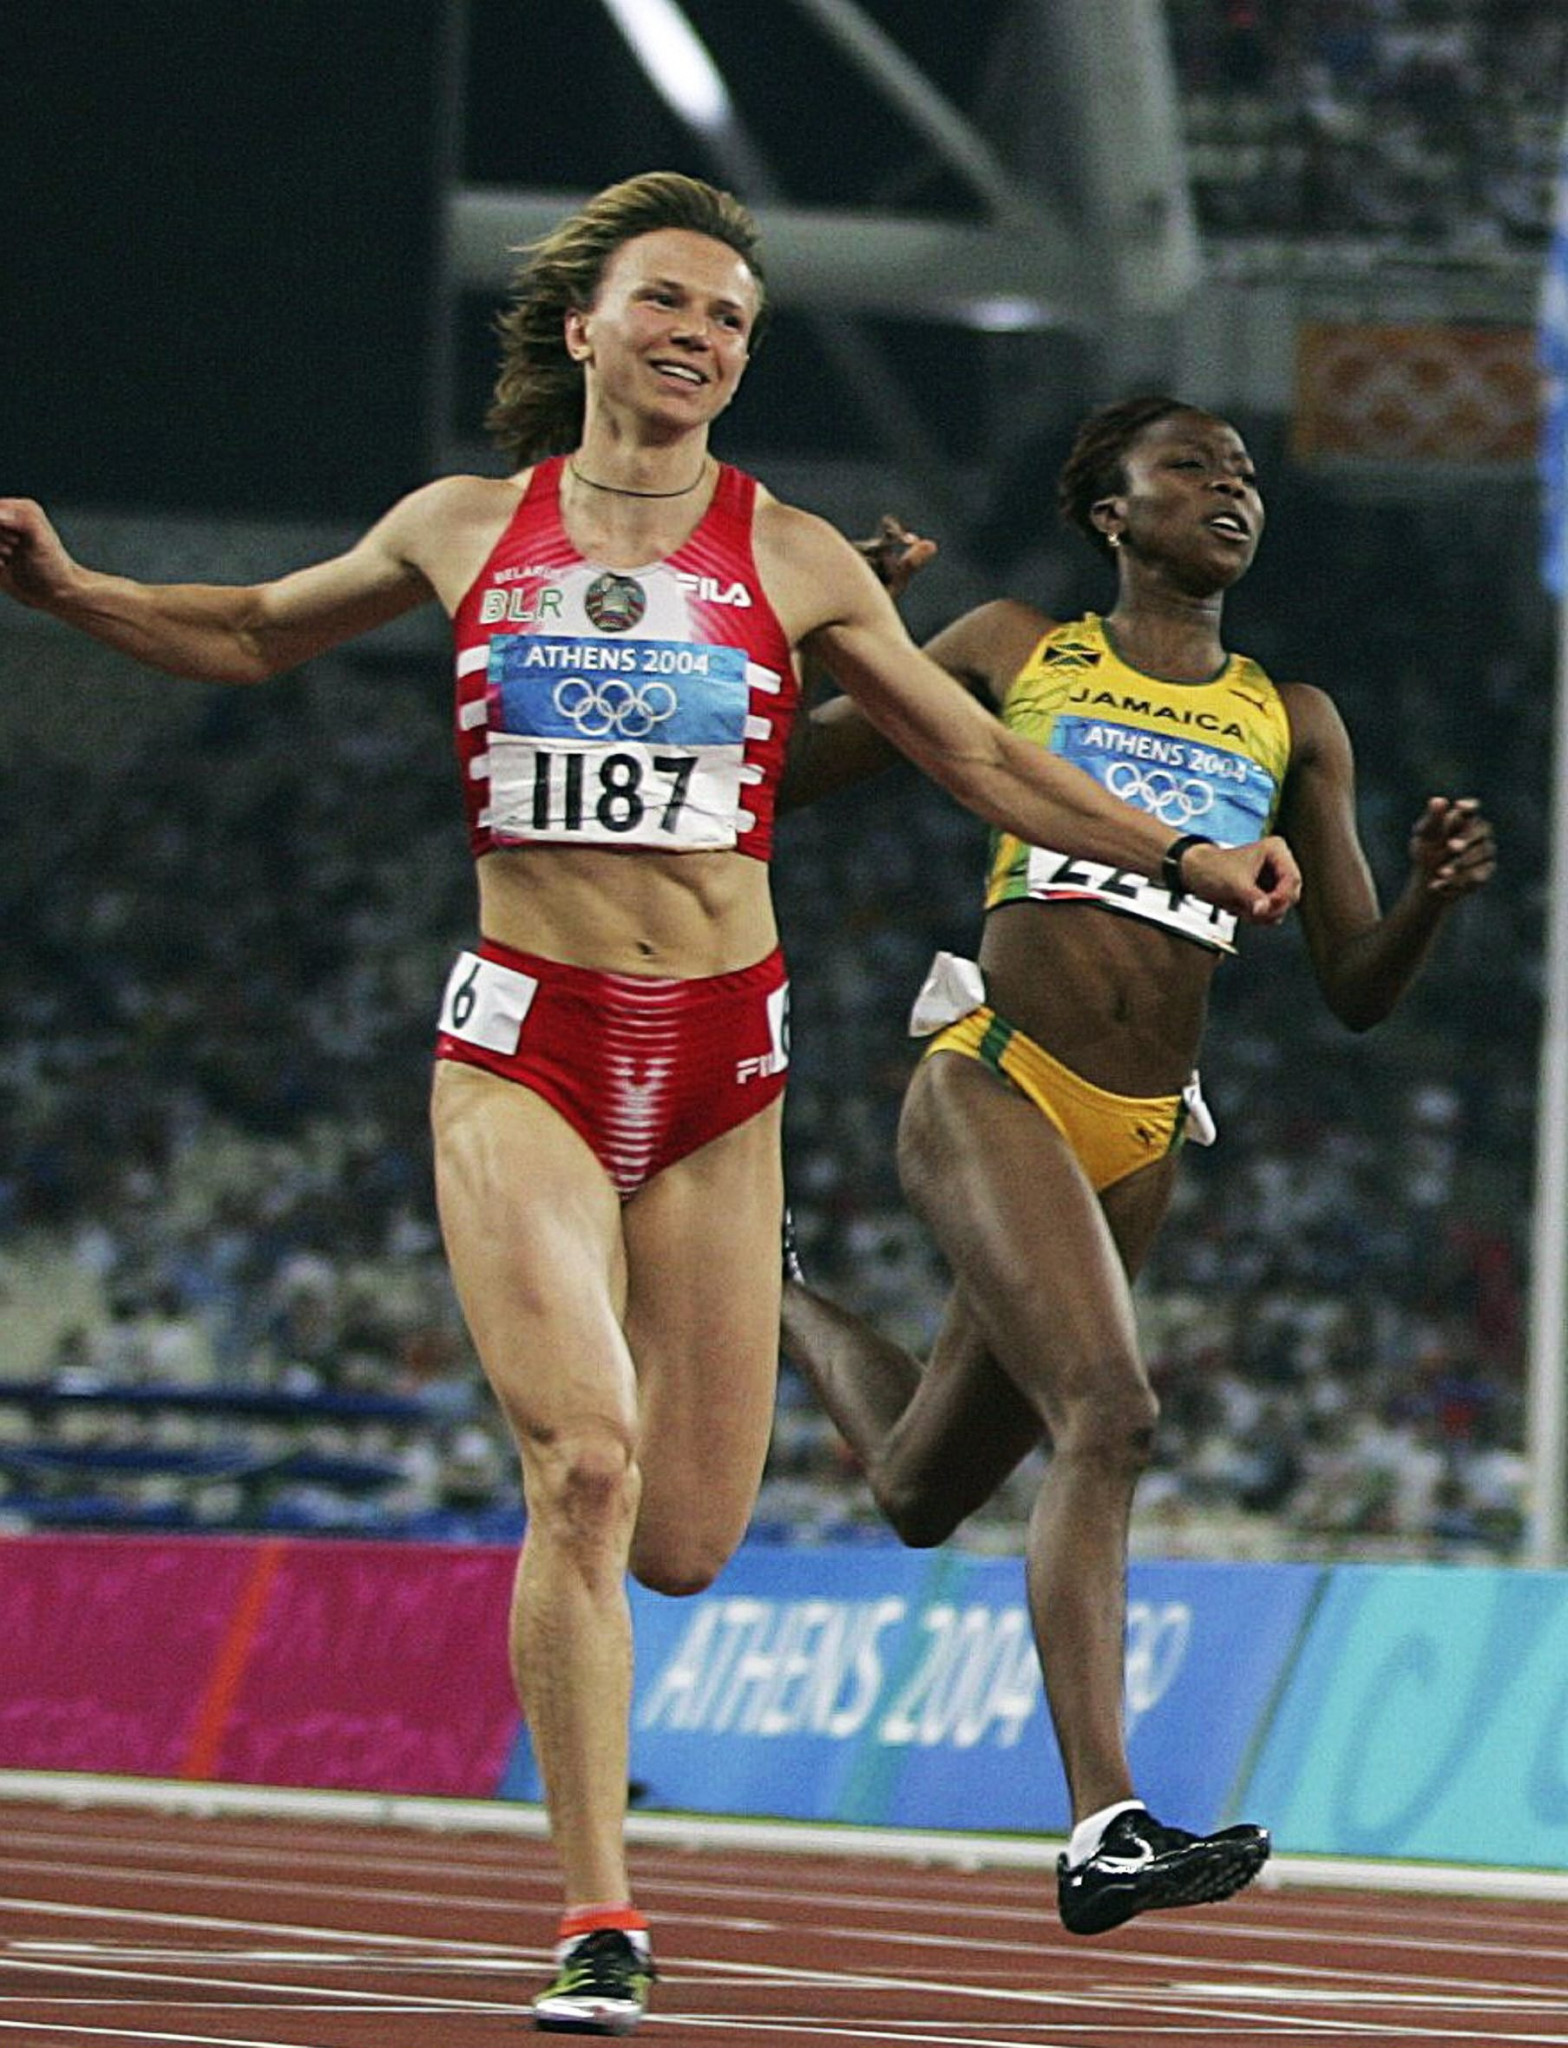 Yulia Nesterenko won the Olympic 100 metres gold medal at Athens 2004 and is an ambassador for Minsk 2019 ©Getty Images